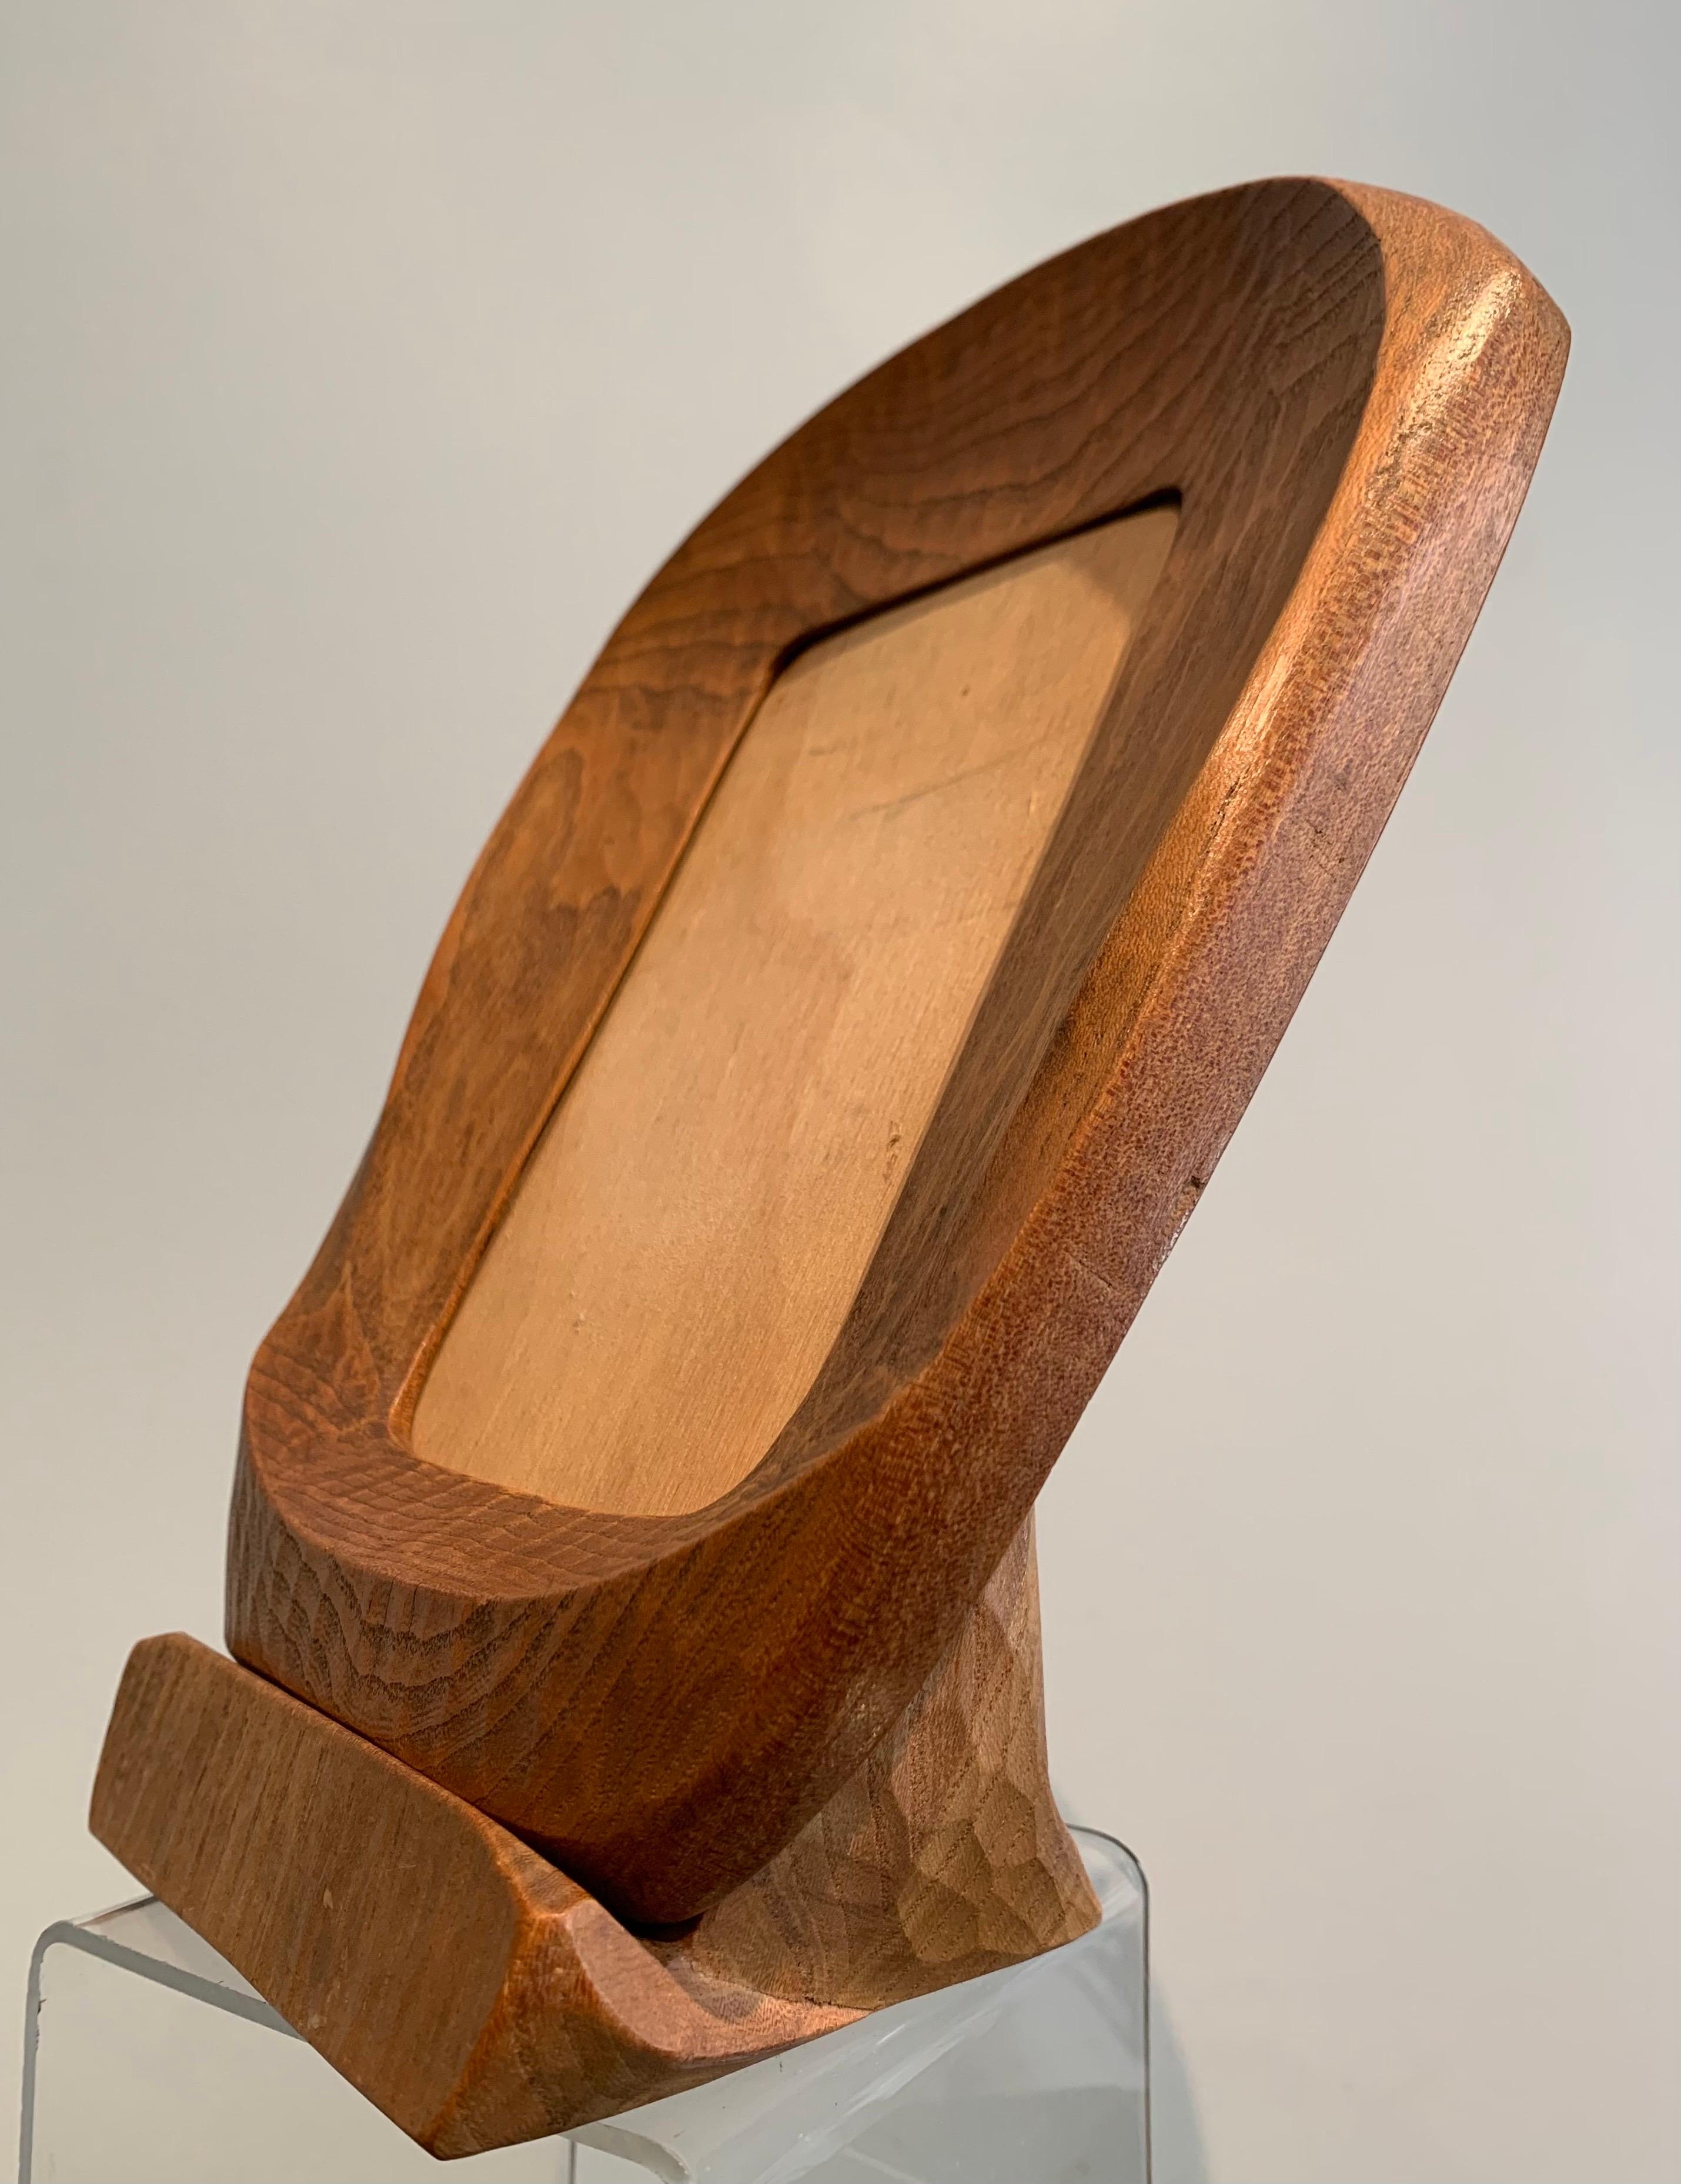 Anthroposophical frame, carved natural wood.
Desk frame
Monogram engraved on the back of the support
The frame is independent and can be hung on a wall or placed on its support.
Perfect sight size for photo (14x9cm).
Rudolf Steiner school, Dornach